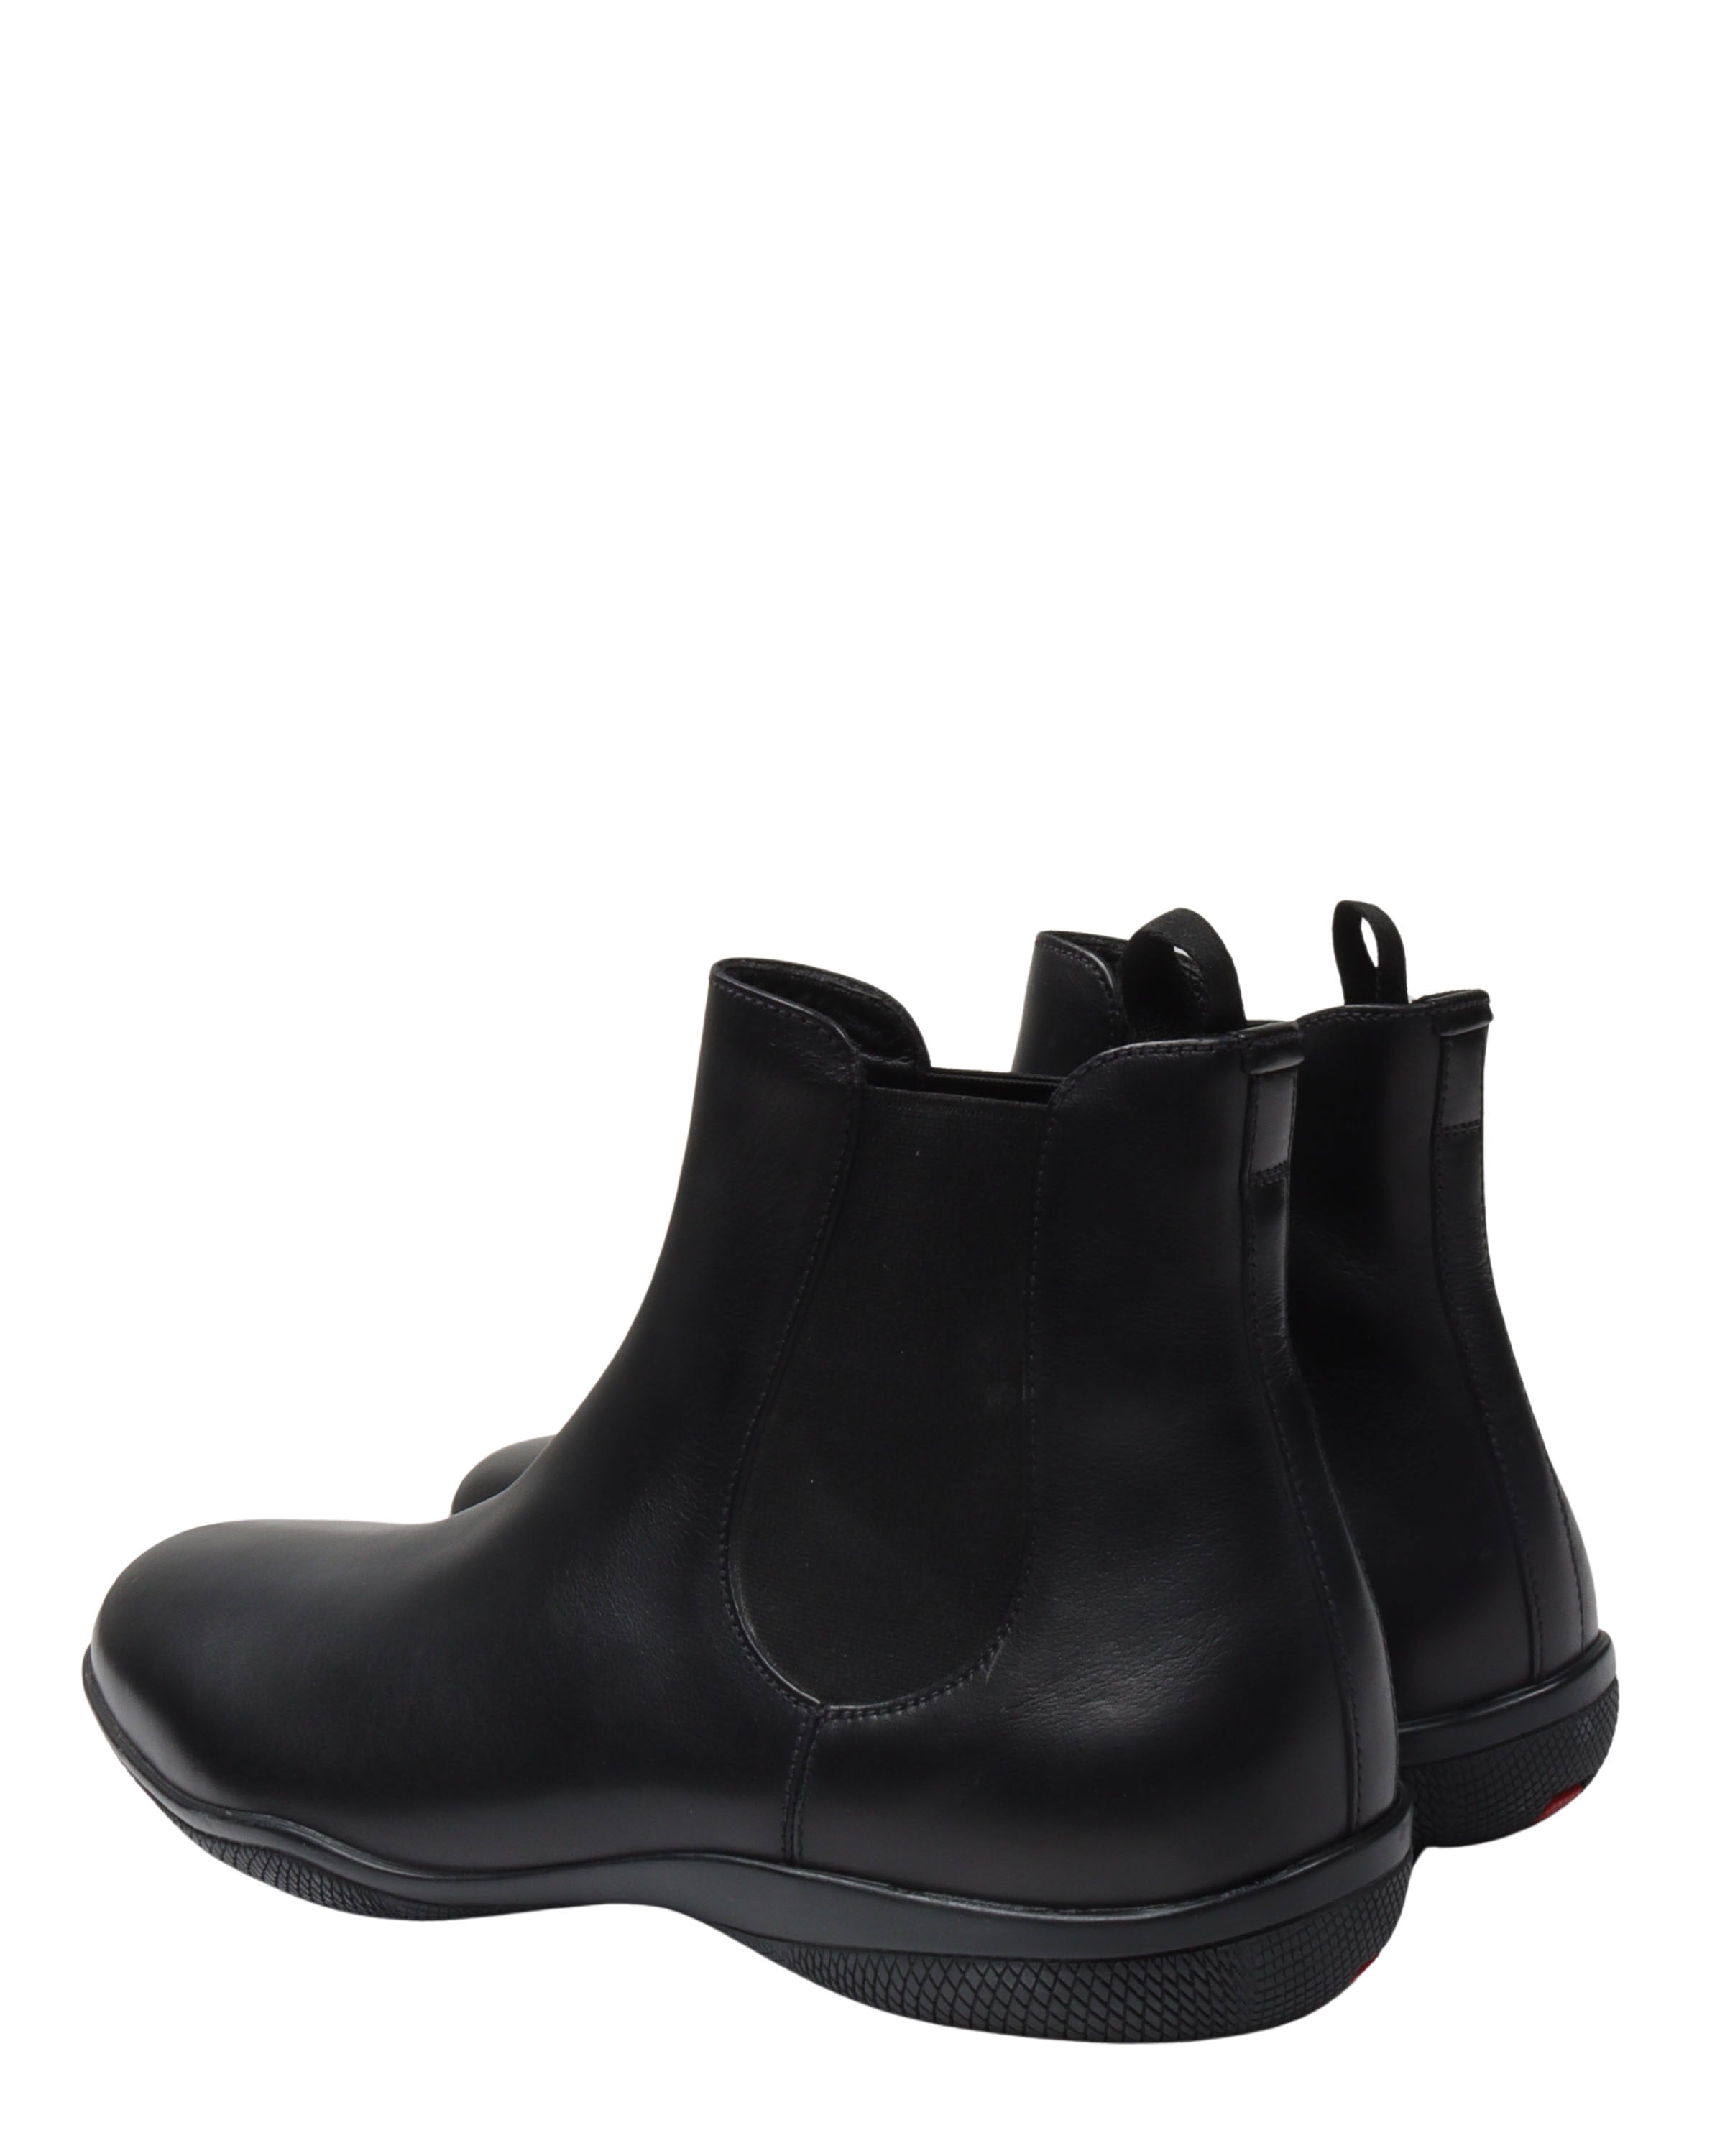 Sport Leather Chelsea Boots